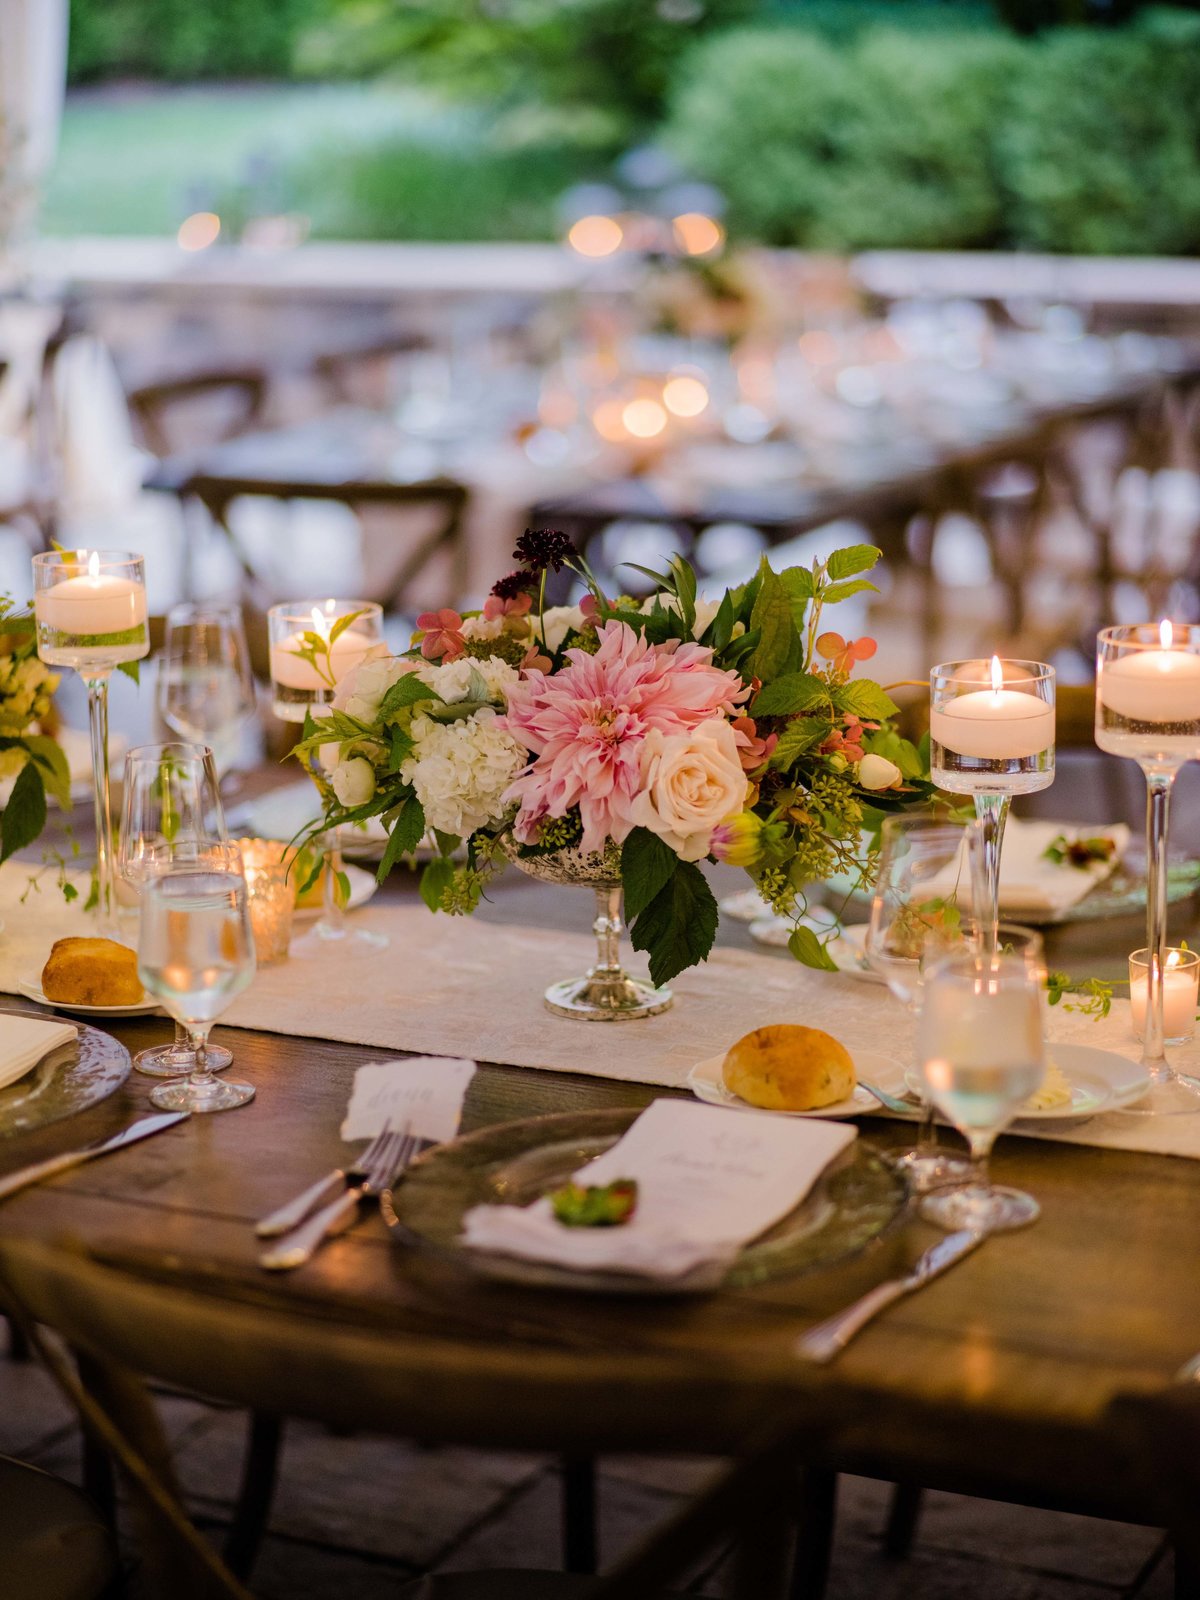 Low compote arrangement with blush dahlia and roses look stunning at this garden tent wedding.